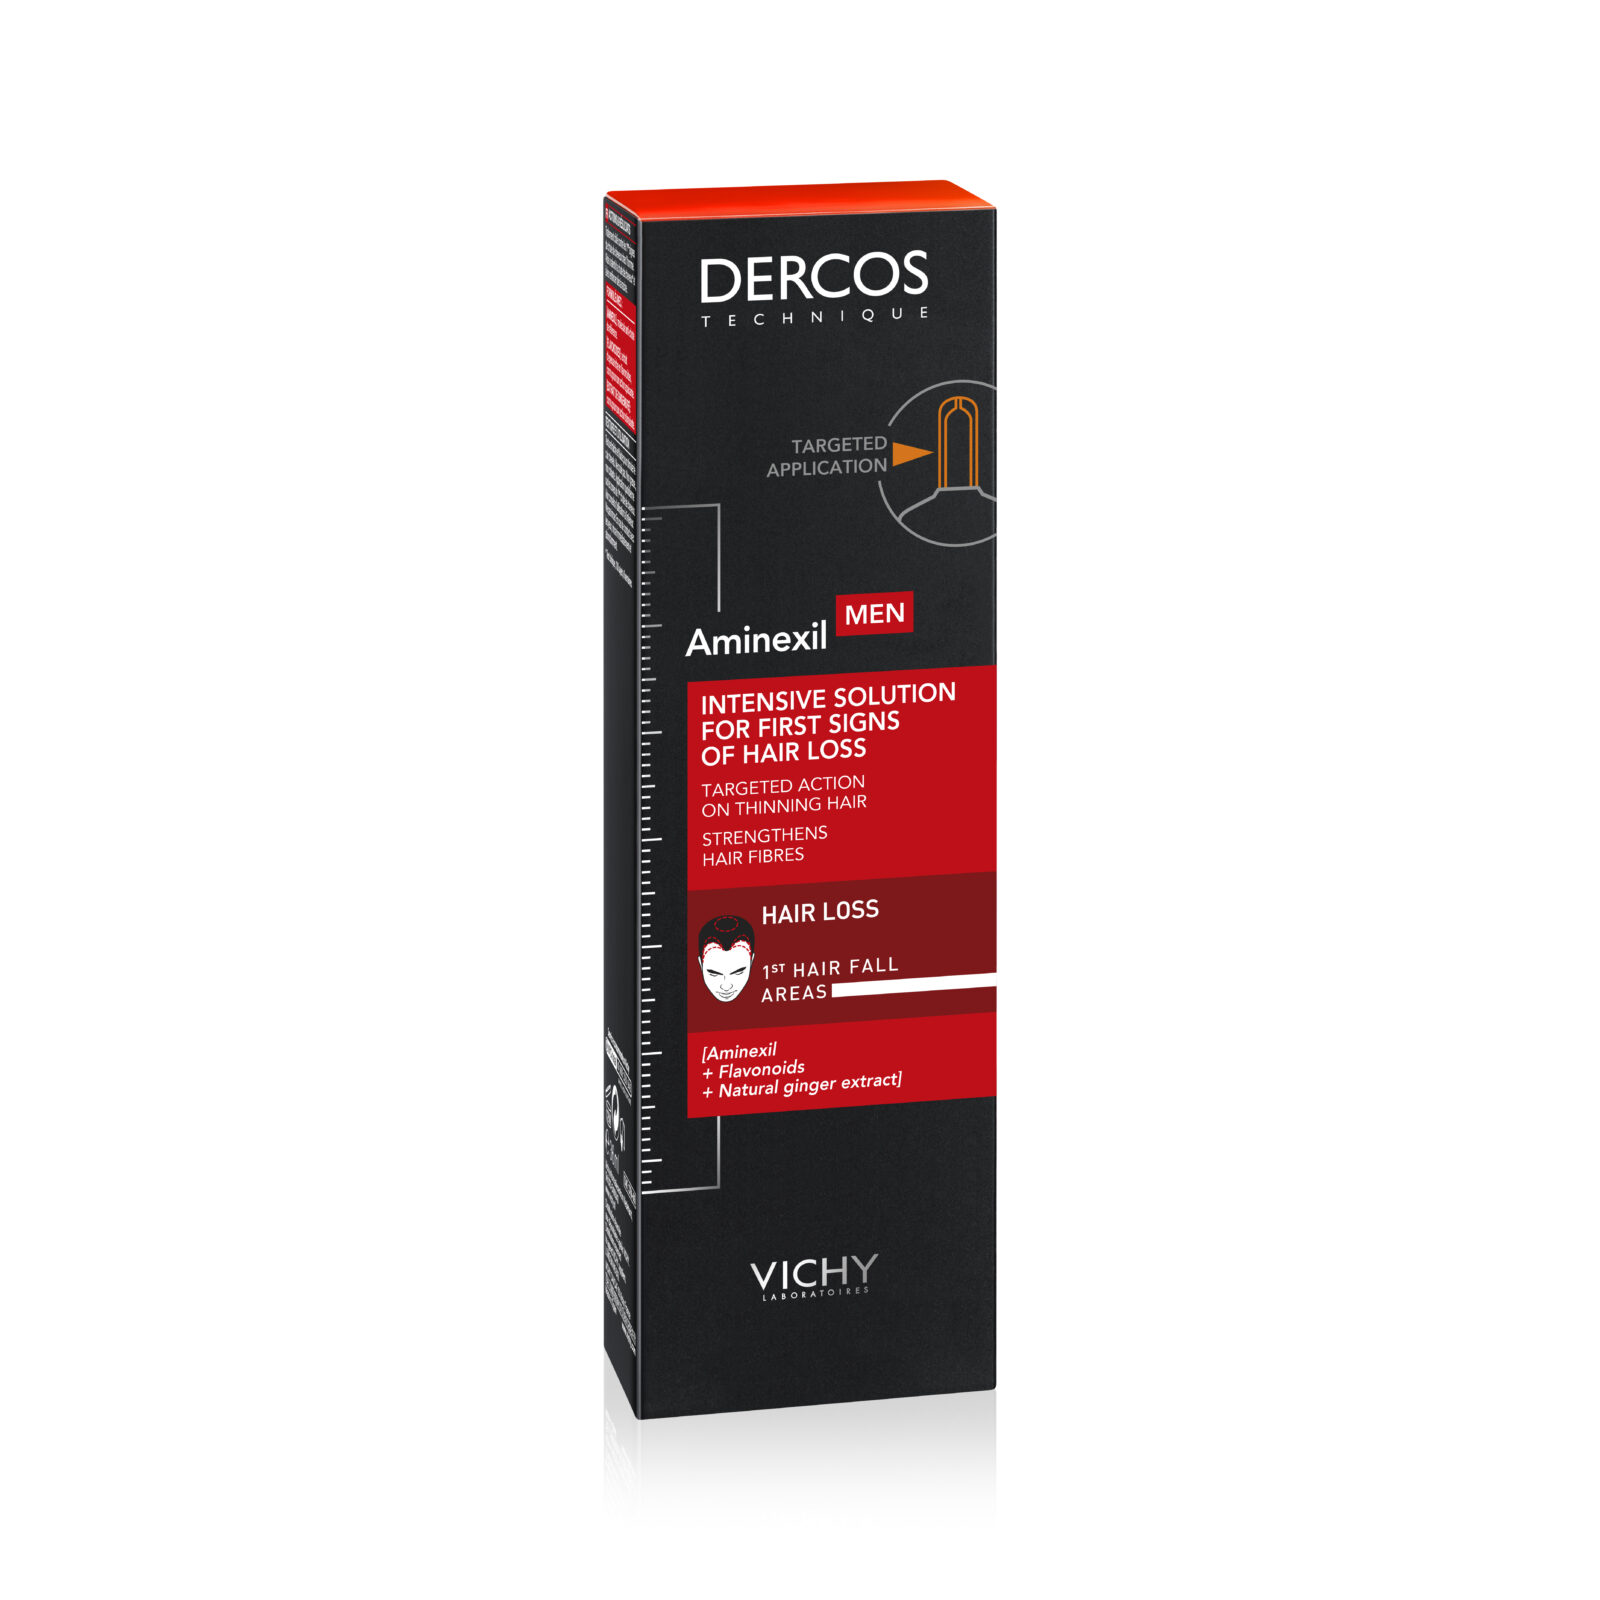 DERCOS_AMINEXIL MEN - Intensive Solution For First Signs of Hair Loss